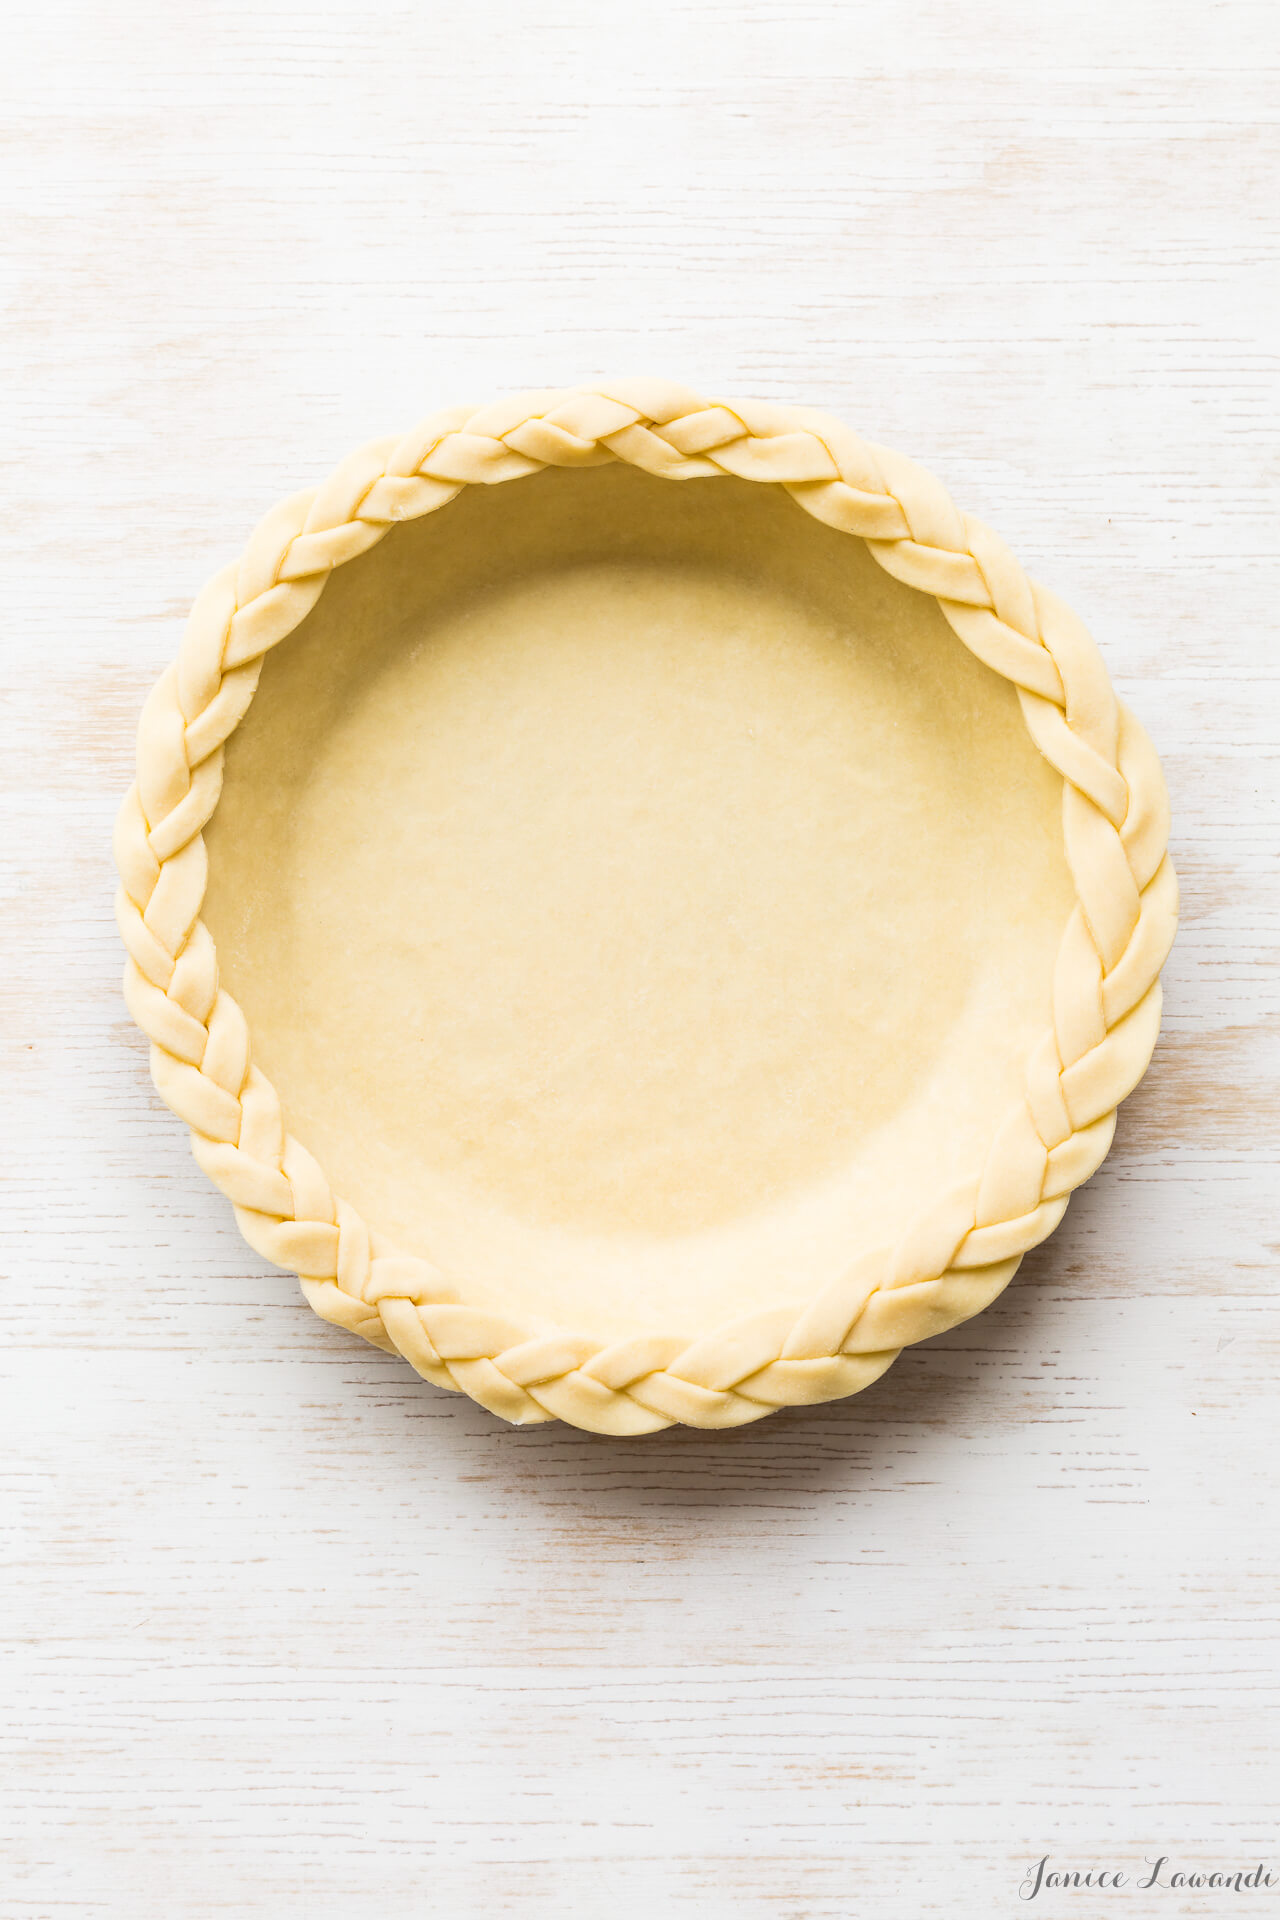 Unbaked pie shell made from an easy all-butter pie dough recipe that you put together in the food processor